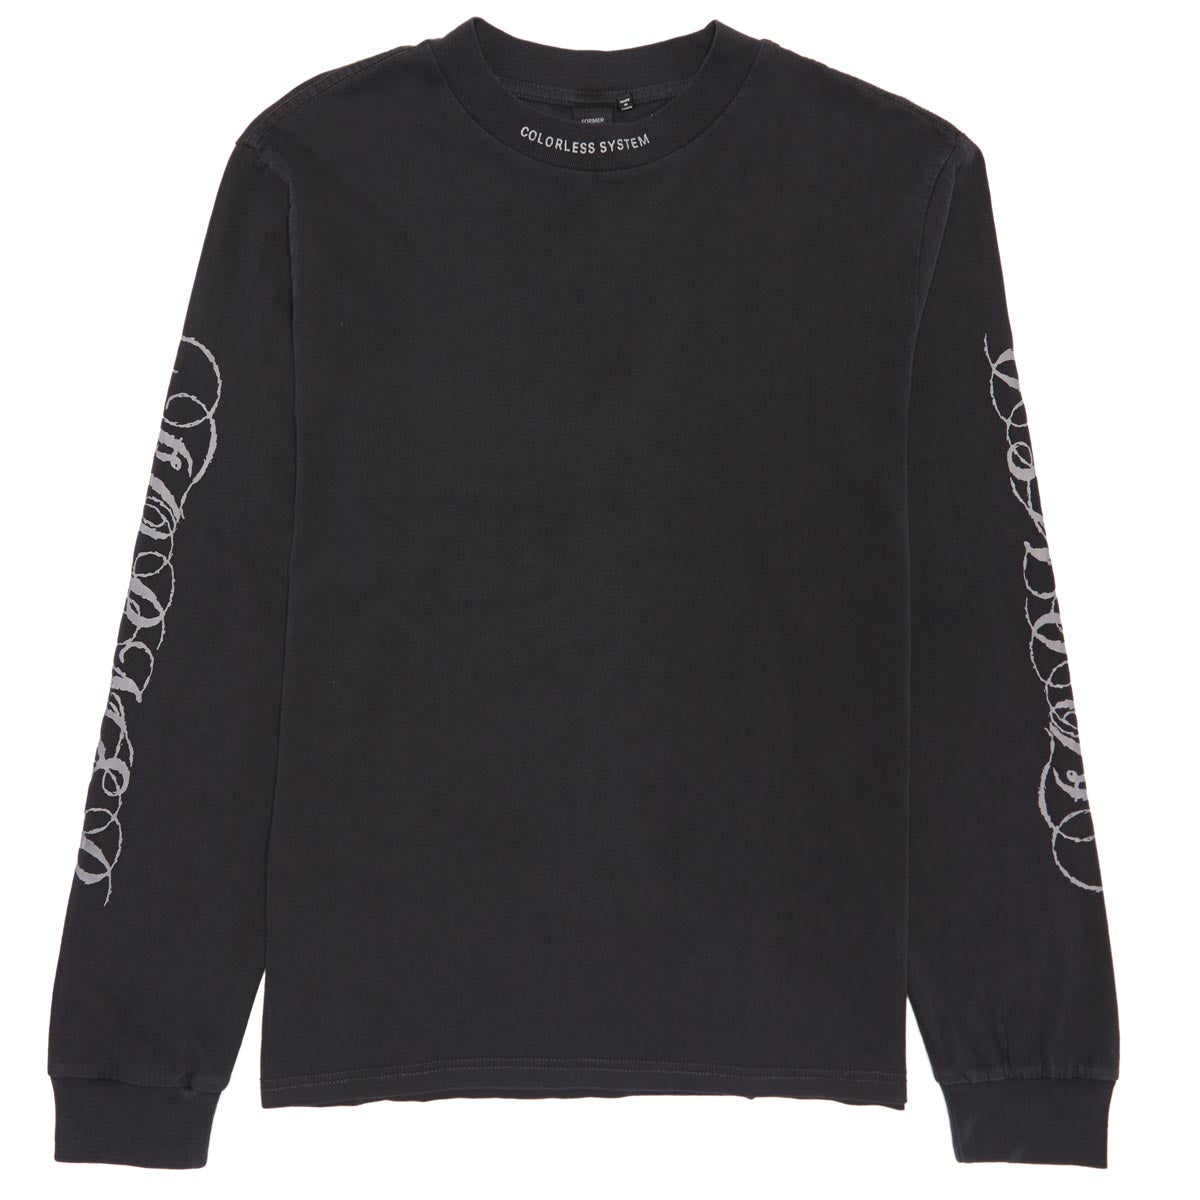 Former Wire Long Sleeve T-Shirt - Washed Black image 1